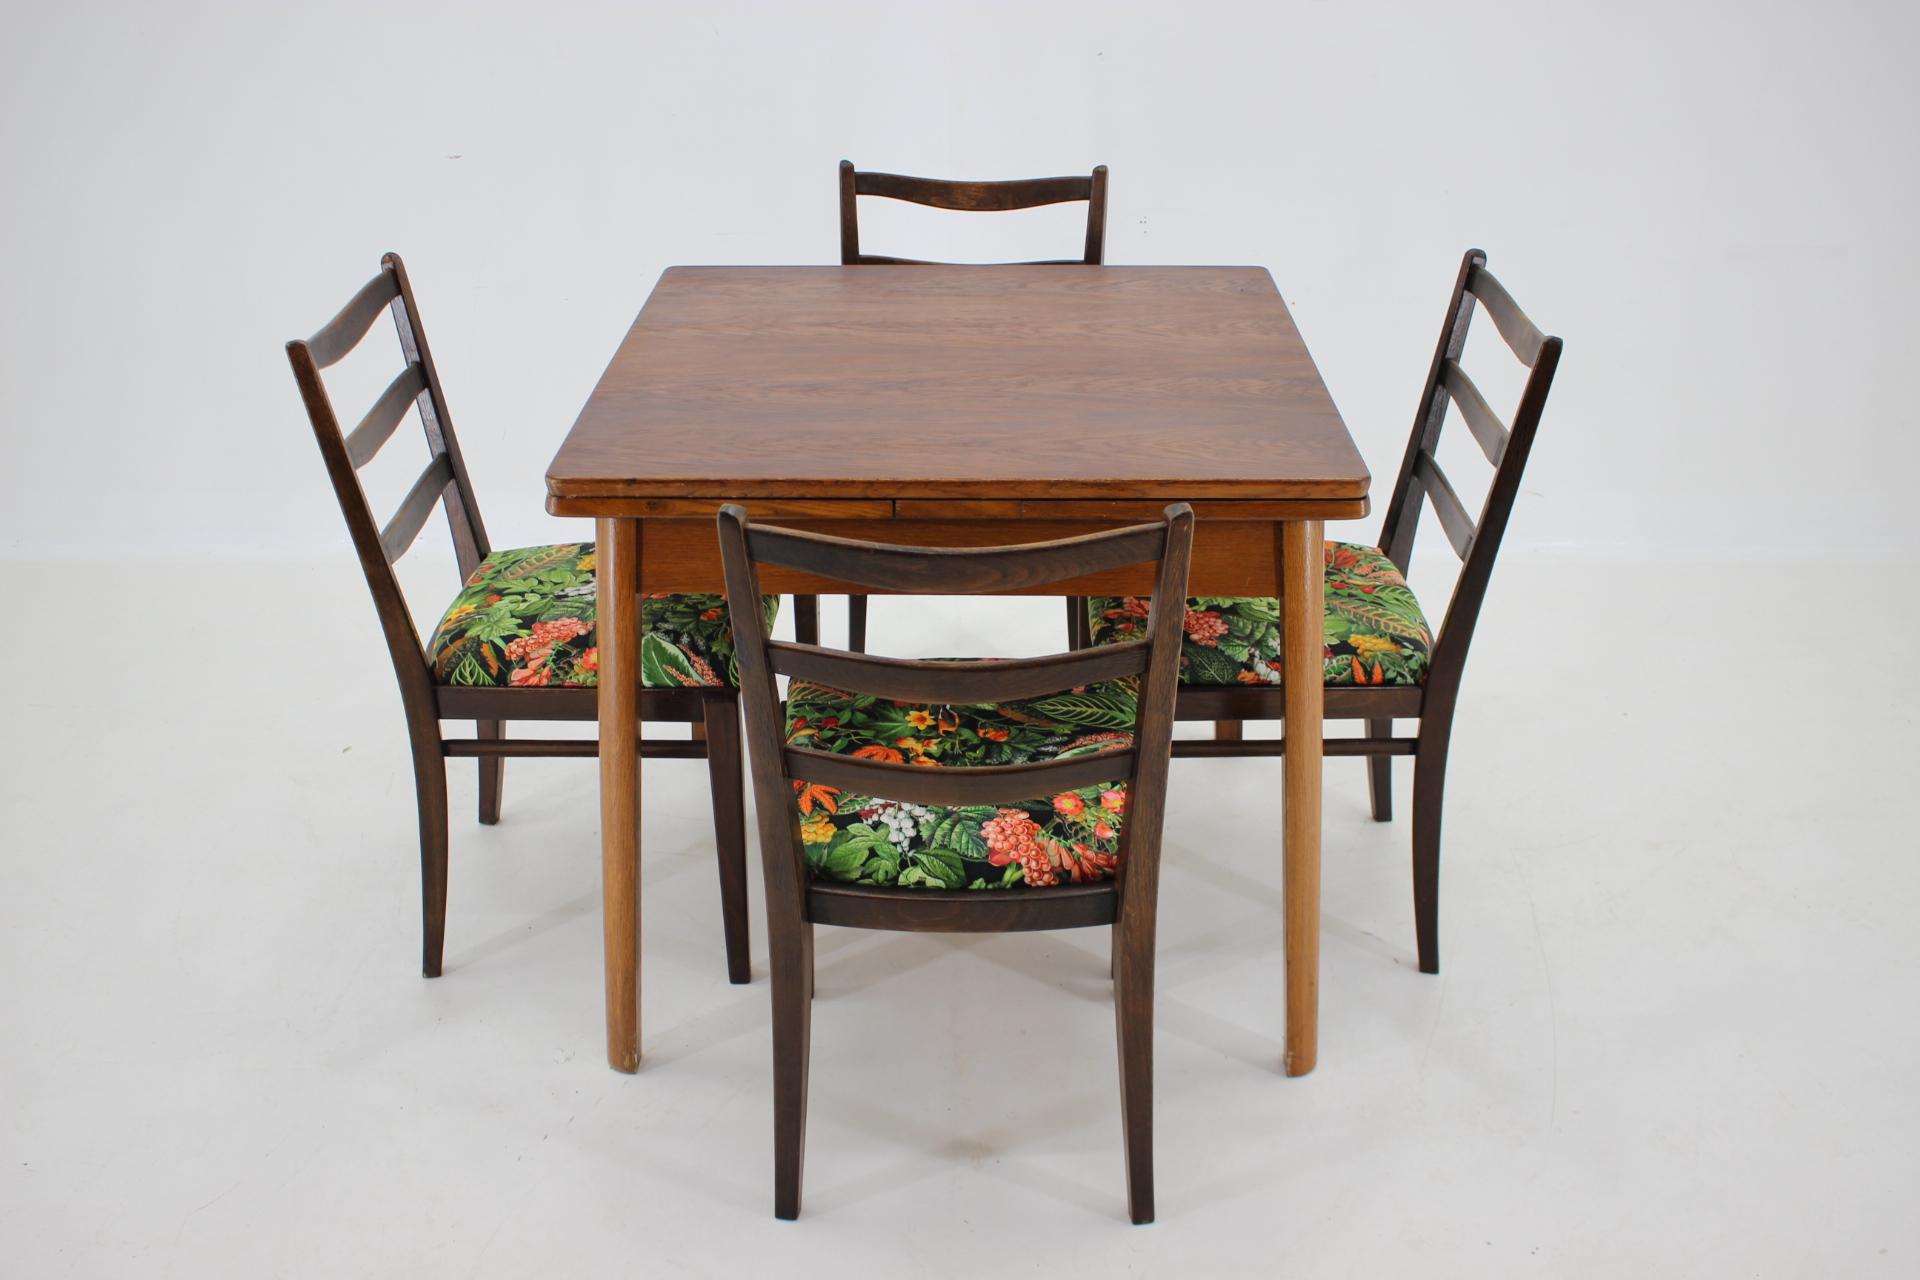 - good original condition with minor signs of use
- Chairs have been newly upholstered
- Table in oak finish 
- Chairs made of stained beech wood
- Chairs dimensions : Height 86cm, Seat height 47cm, Width 44cm, 
                                  